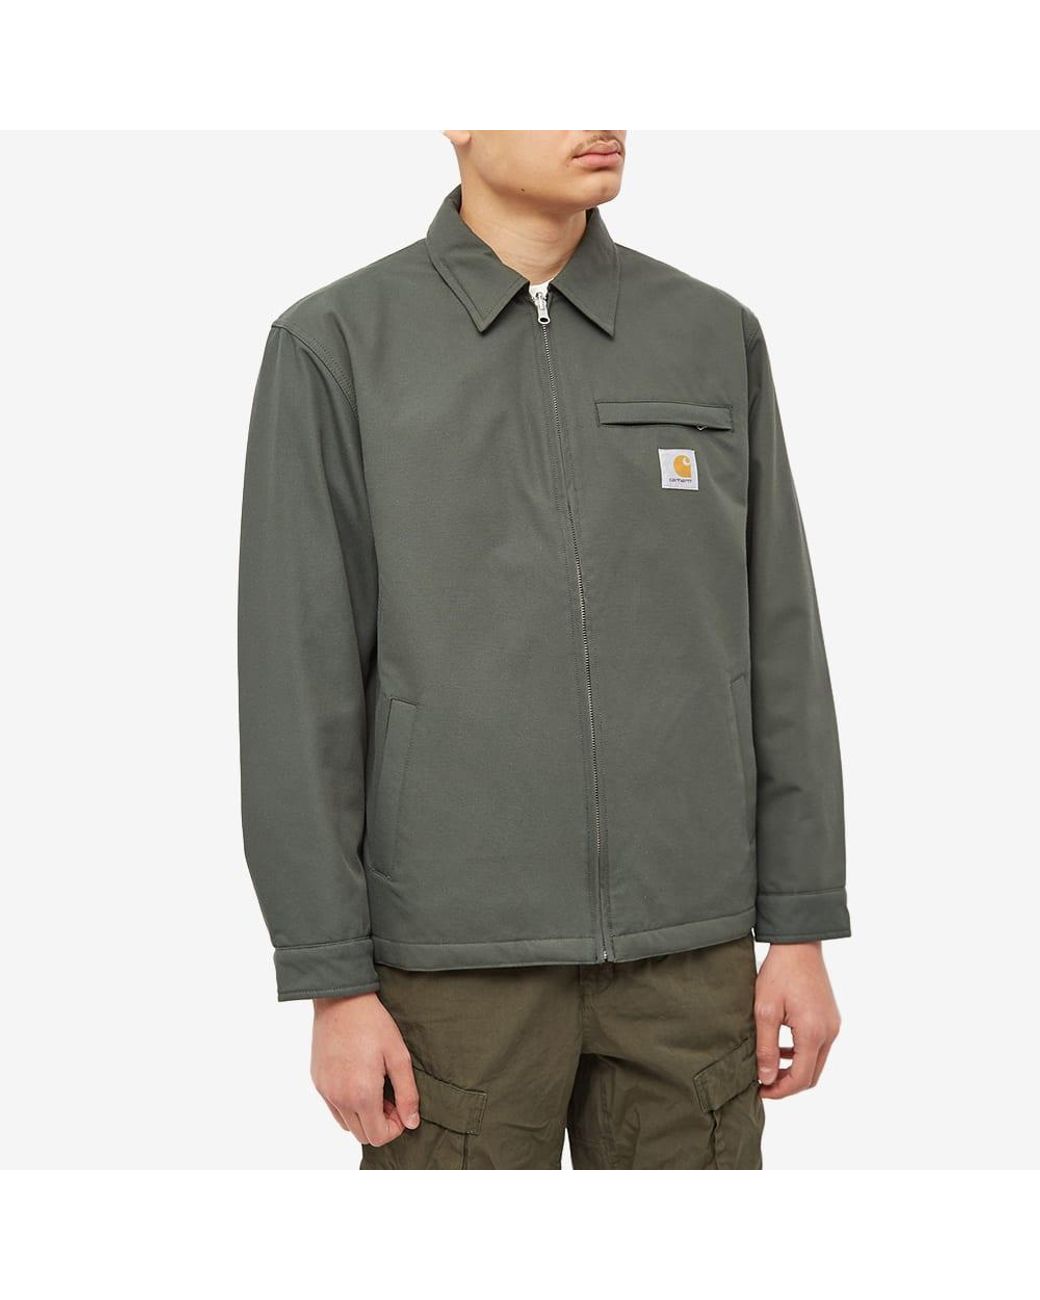 Carhartt WIP Reversible Madera Jacket in Green for Men | Lyst Canada